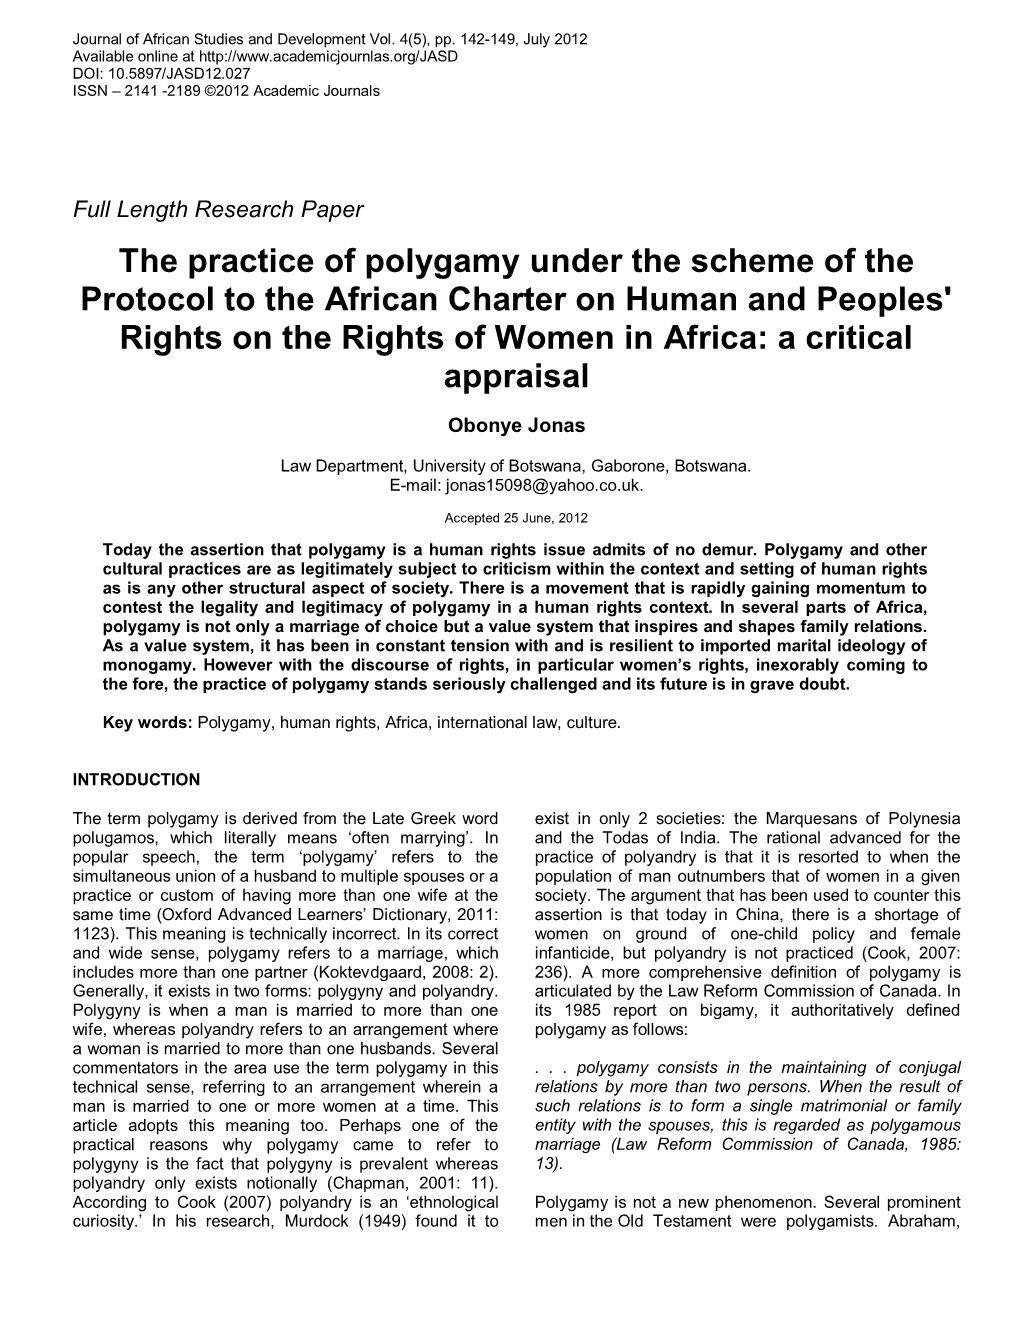 The Practice of Polygamy Under the Scheme of the Protocol to the African Charter on Human and Peoples' Rights on the Rights of Women in Africa: a Critical Appraisal